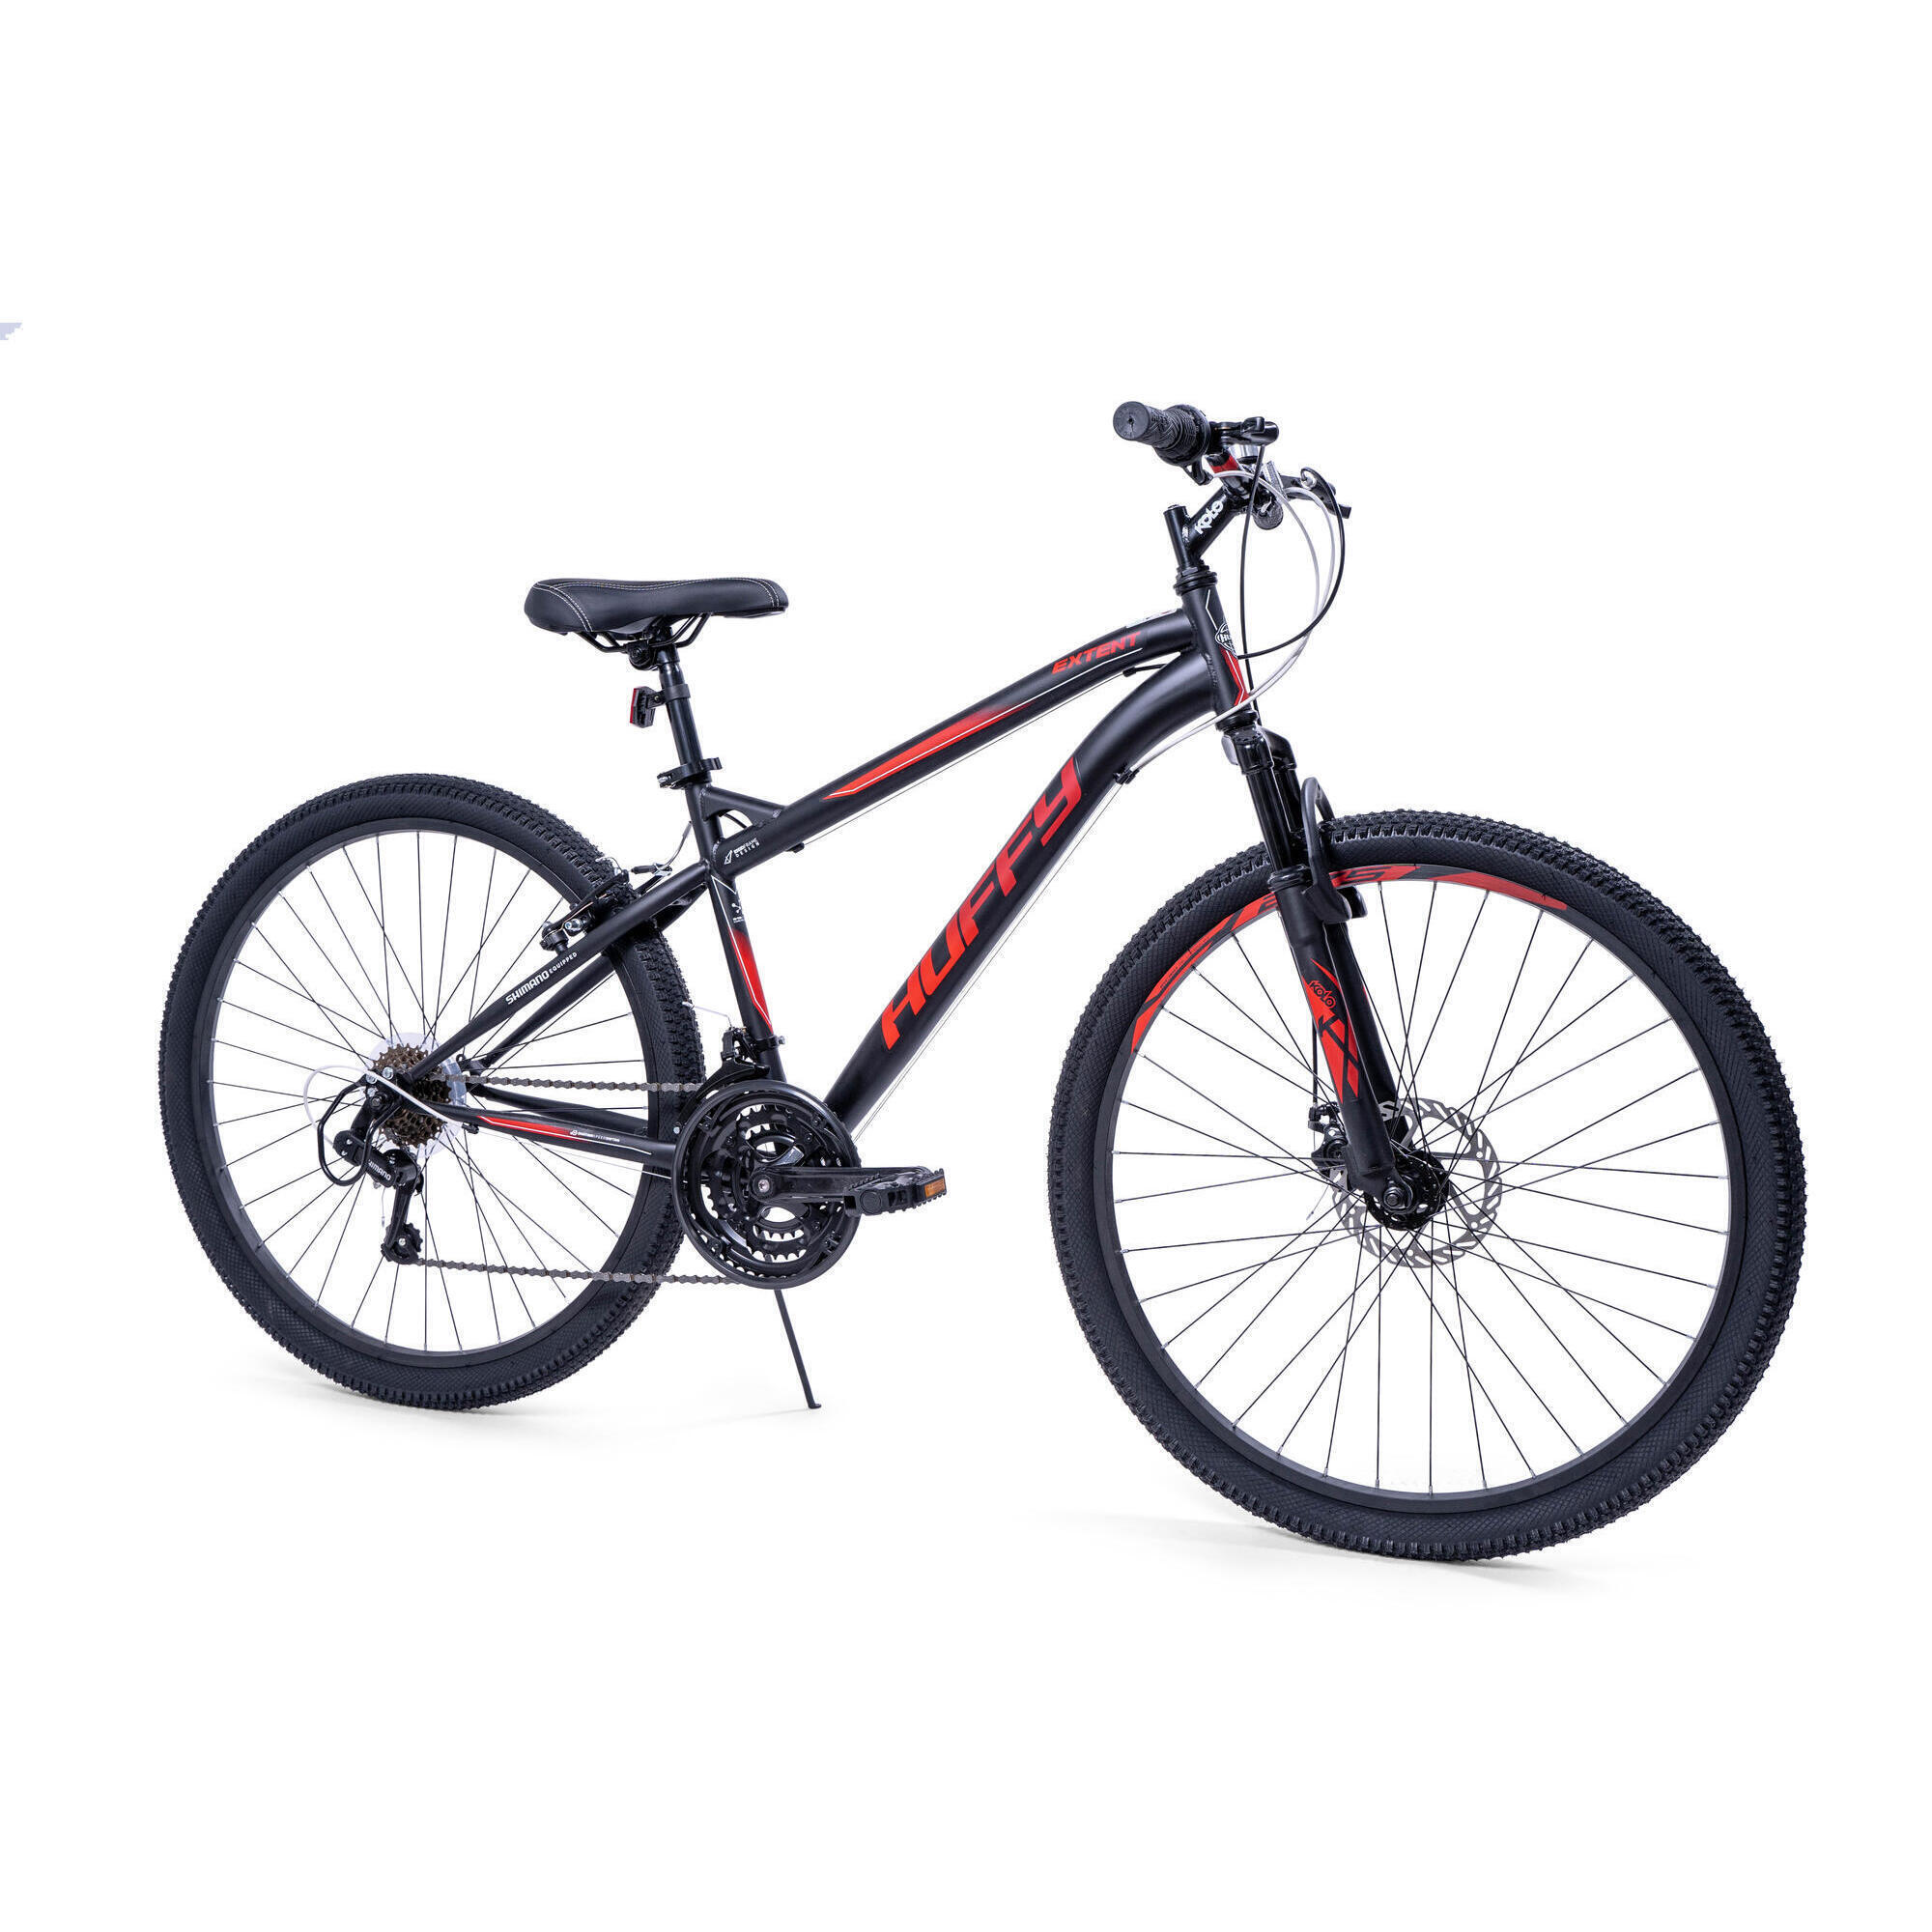 Huffy Extent Mens Mountain Bike 27.5" Wheels 18 Speed Black + Red 1/5